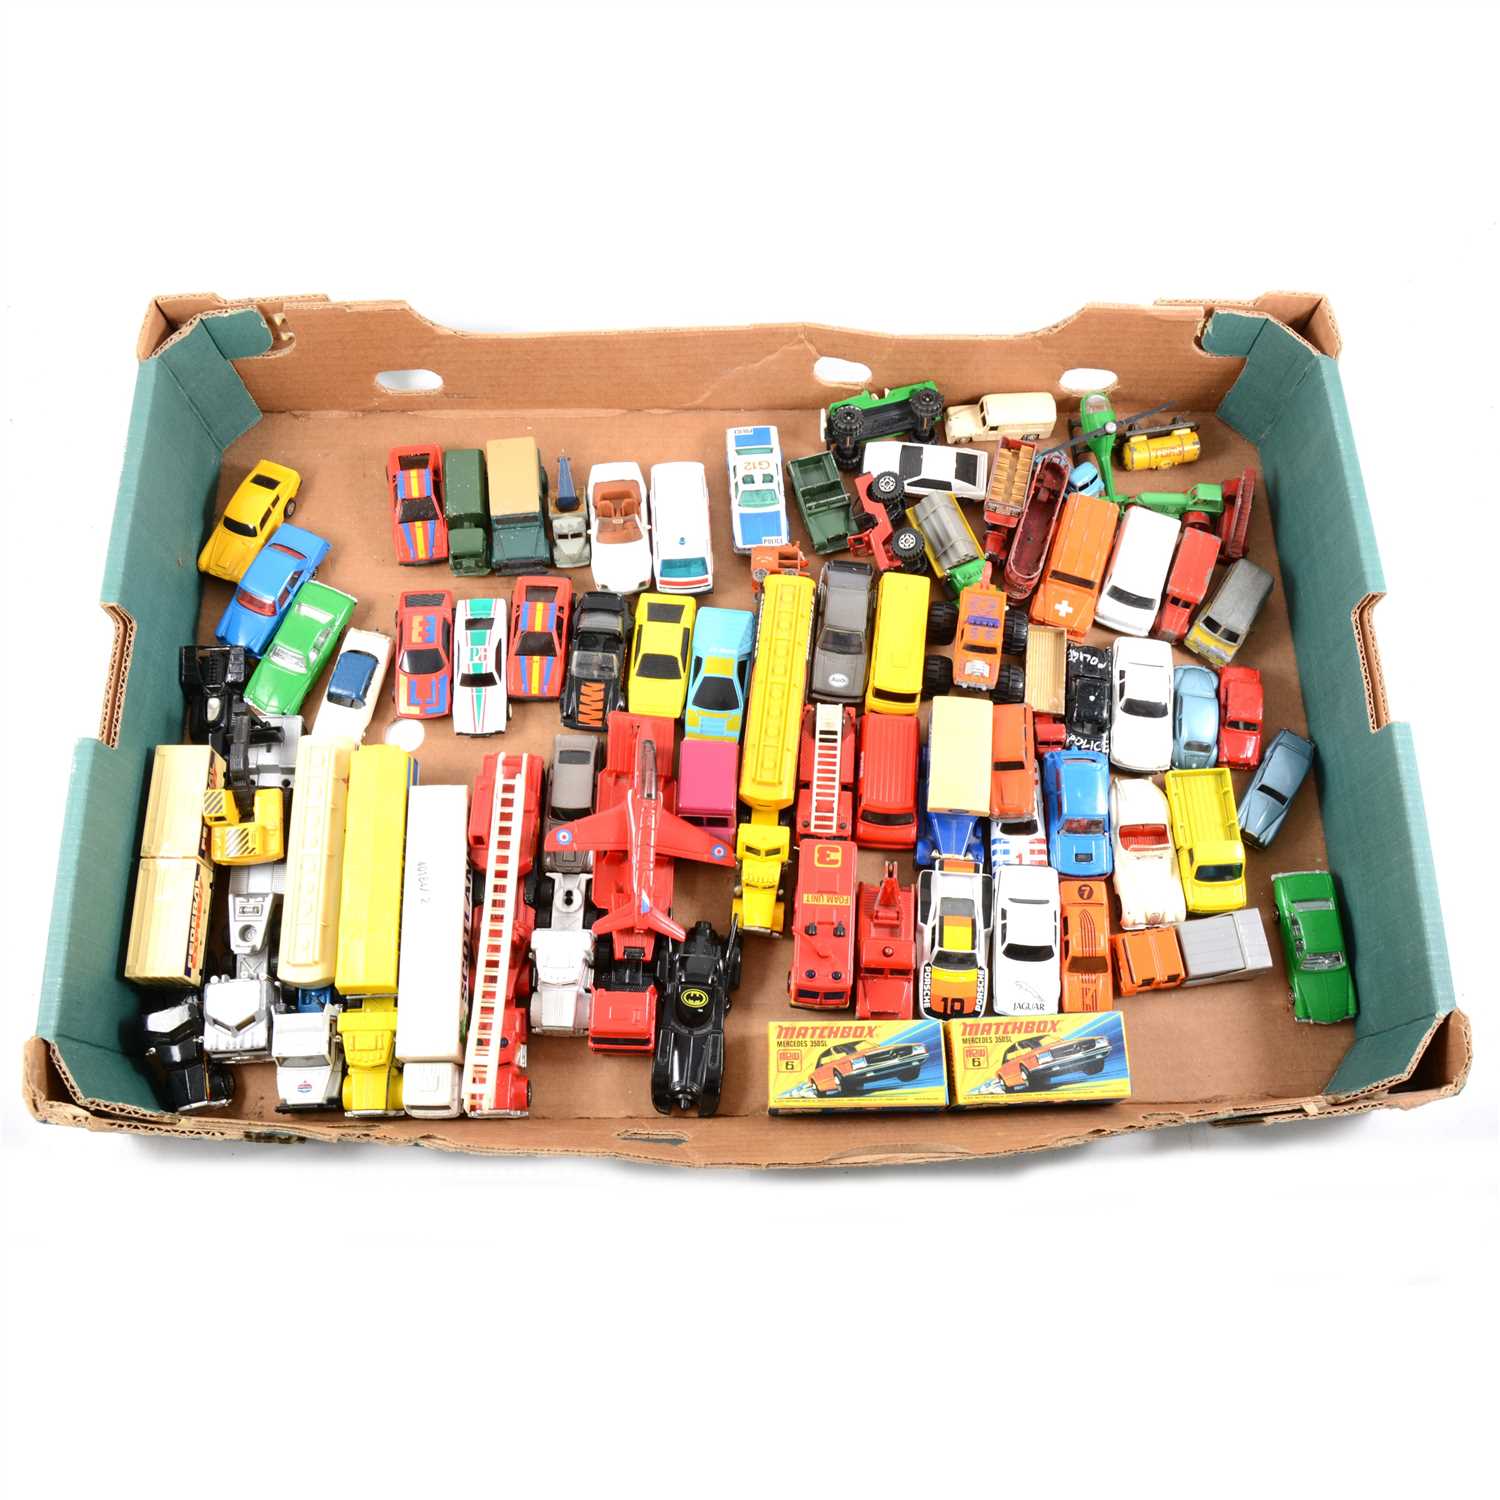 Lot 280 - Matchbox Toys and other models; one tray including Superfast no.6 Mercedes 350SL, (x2 both boxed), other Matchbox 1-75 series models, and Ertl, Corgi and other makers.